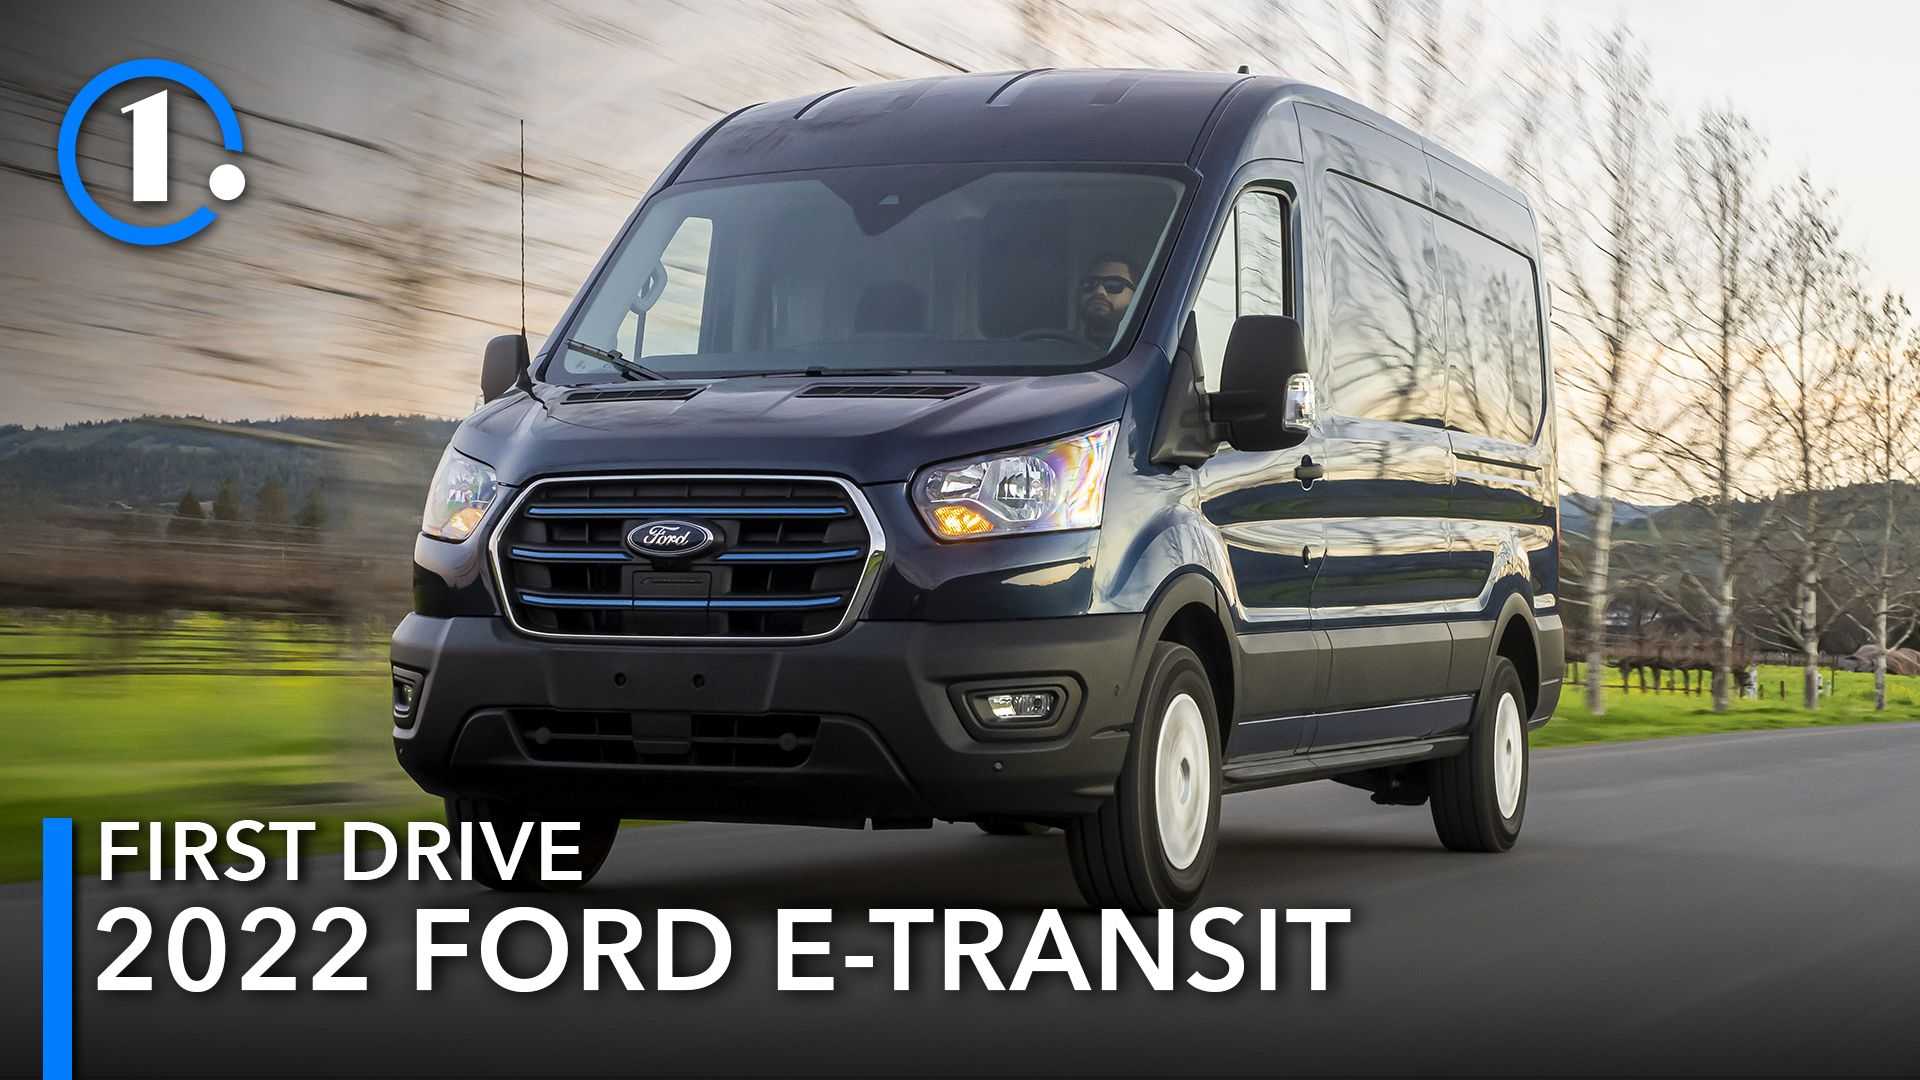 2022 Ford E-Transit First Drive Review ...